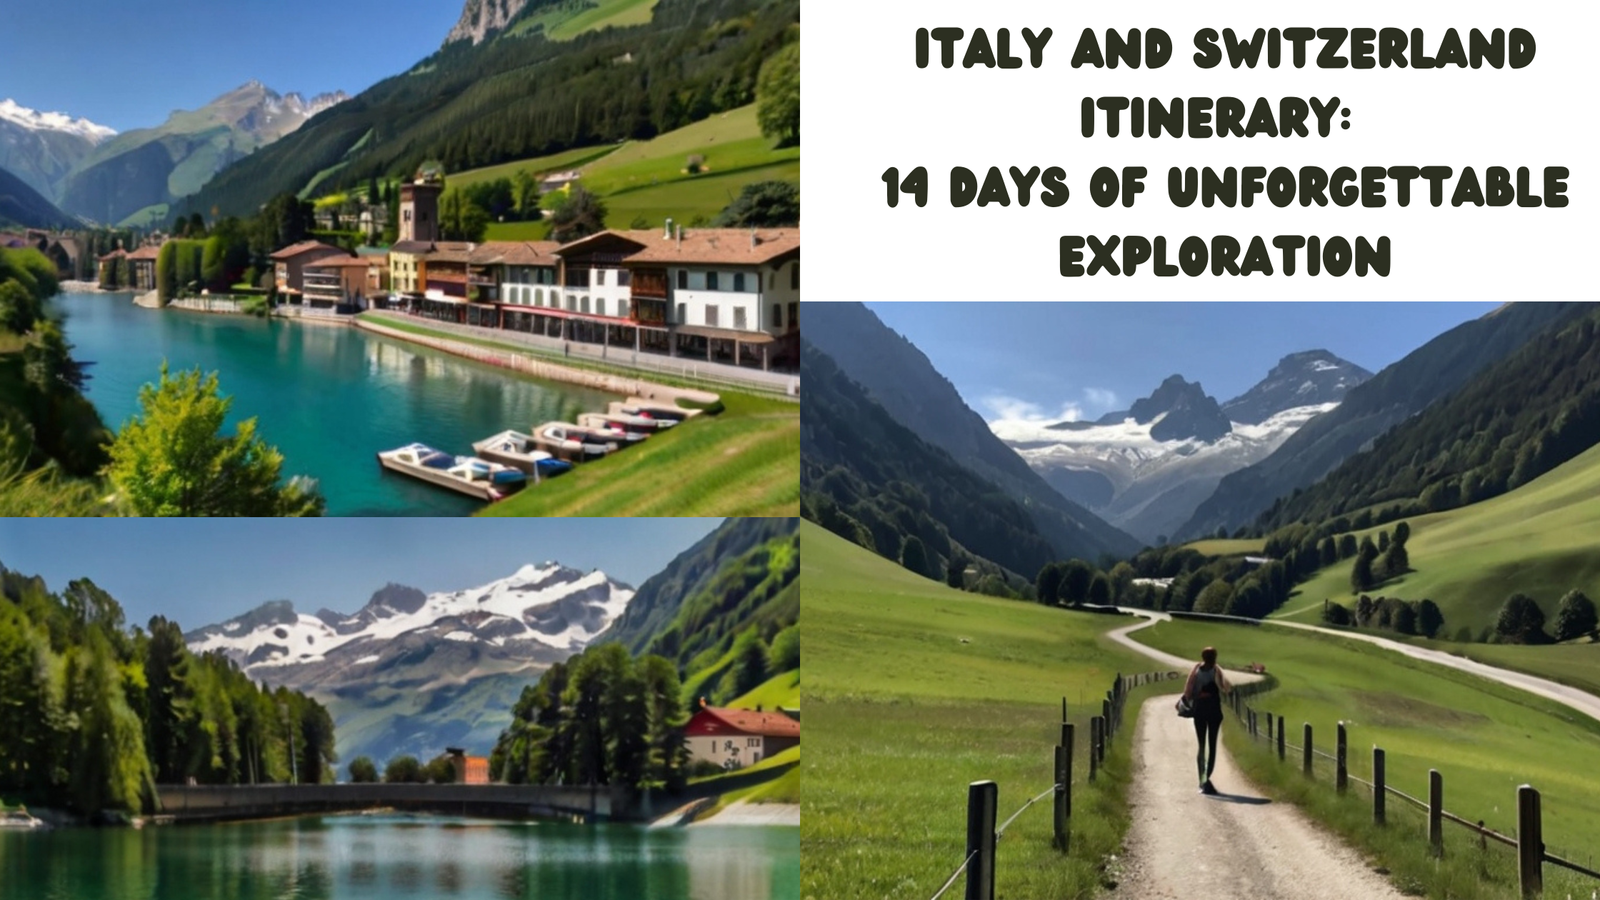 Italy and Switzerland Itinerary for 14 Days From Lakes to Mountains